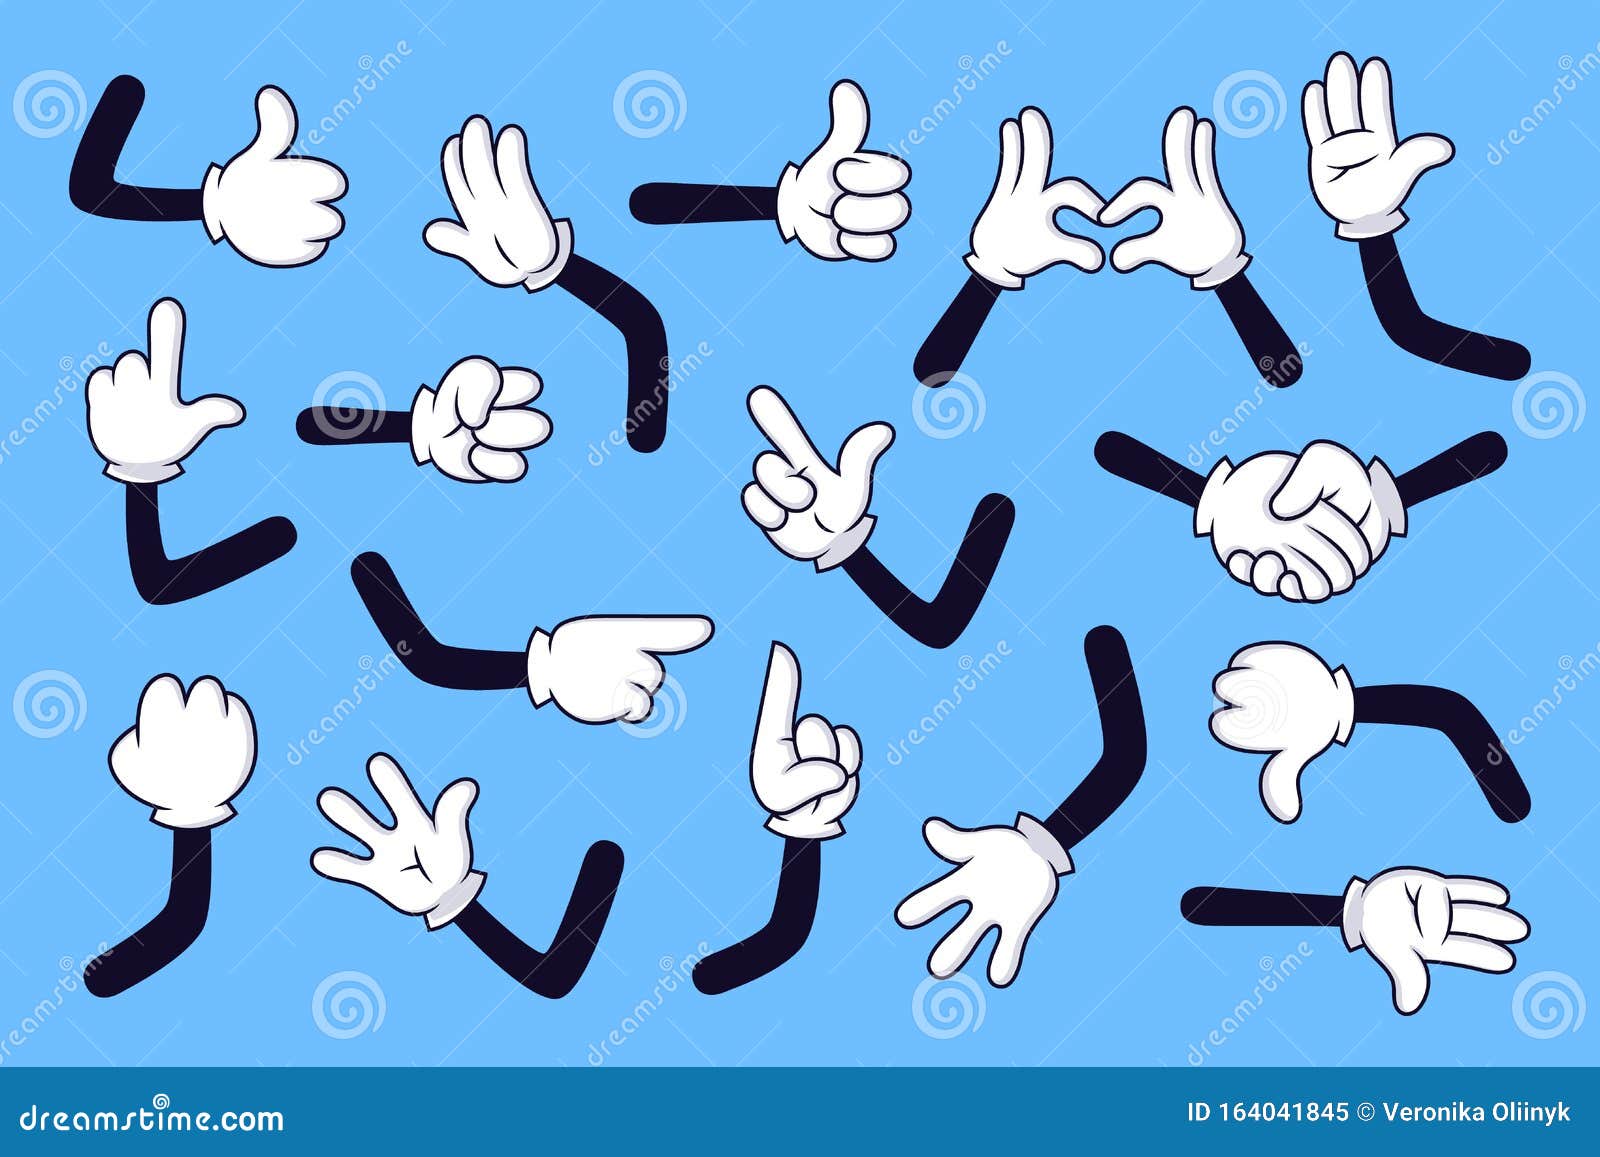 Cartoon Arms. Gloved Hands with Different Gestures, Various Comic Hands